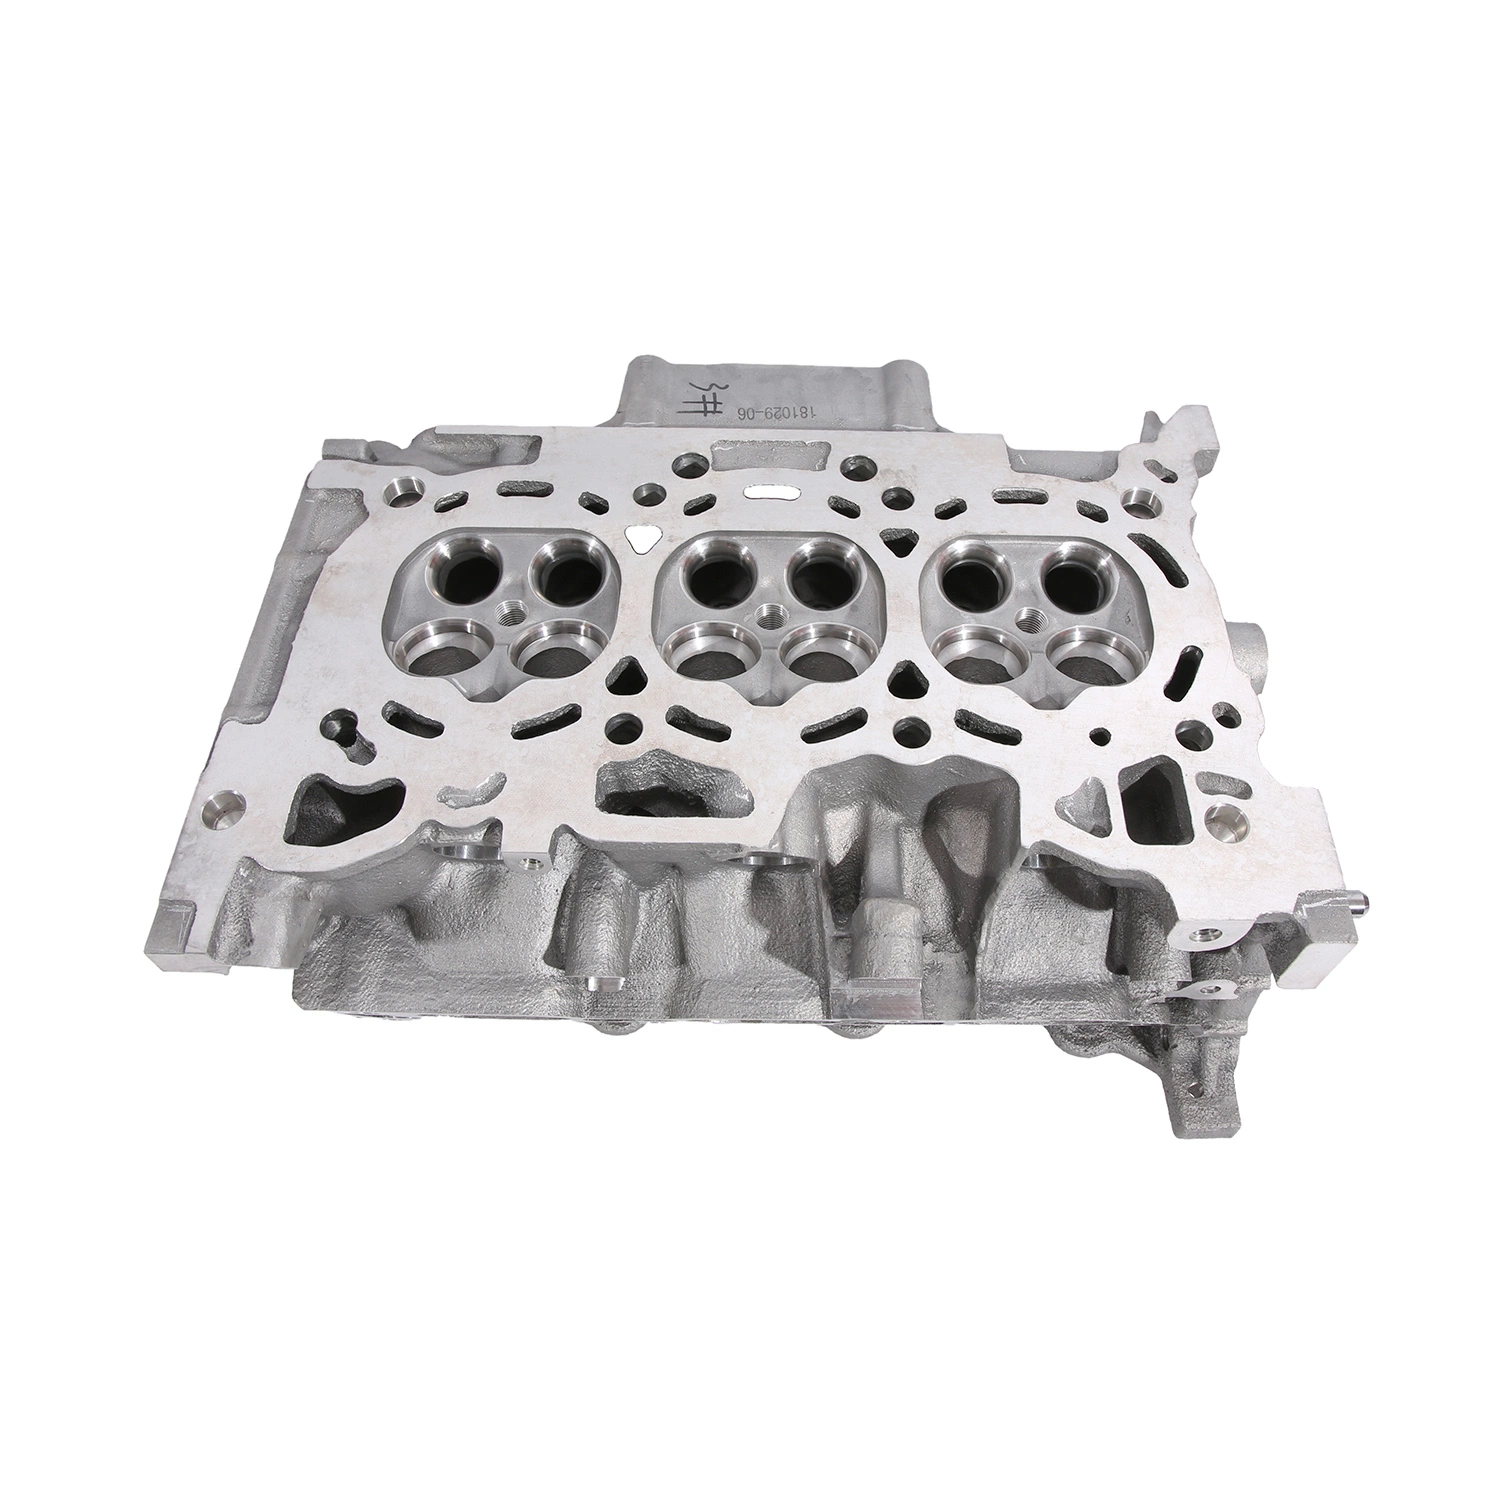 OEM Customized Cast Iron Auto Motorcycle Spare Parts Rapid Prototyping Service for Machinery by 3D Printing Sand Casting & Low Pressure Casting & CNC Machining